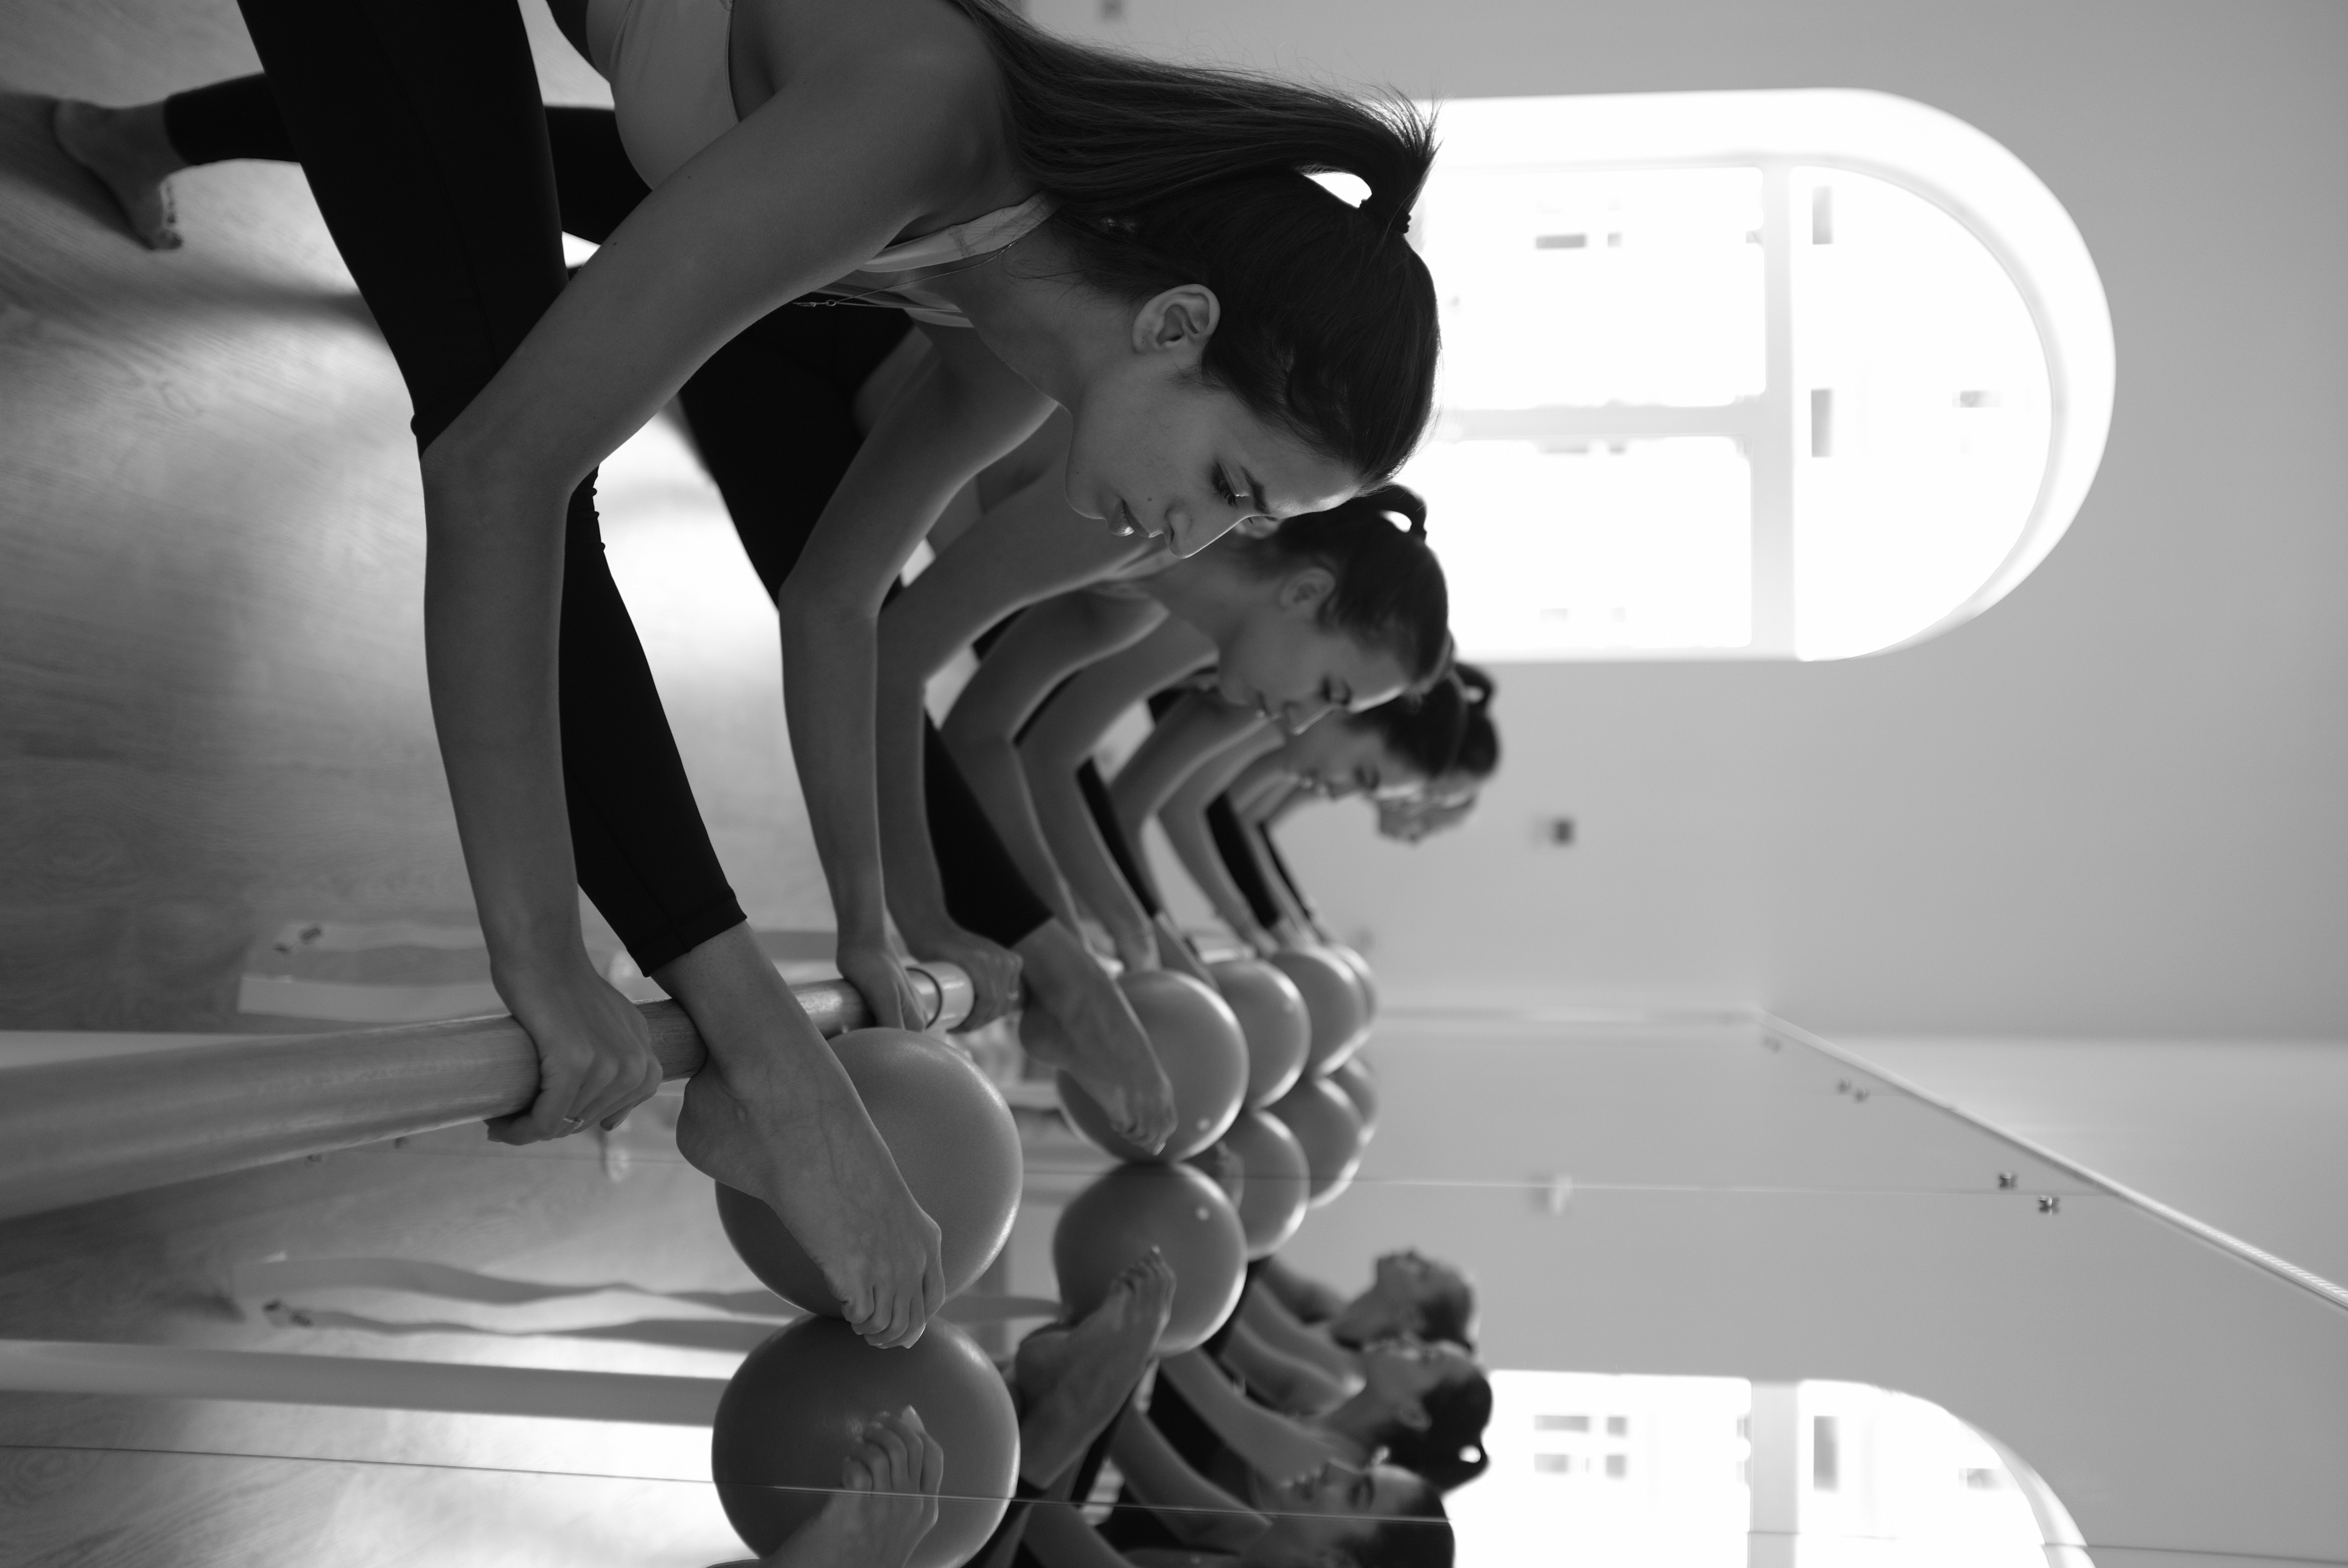 The Benefits of Isometric Exercises Used in Barre